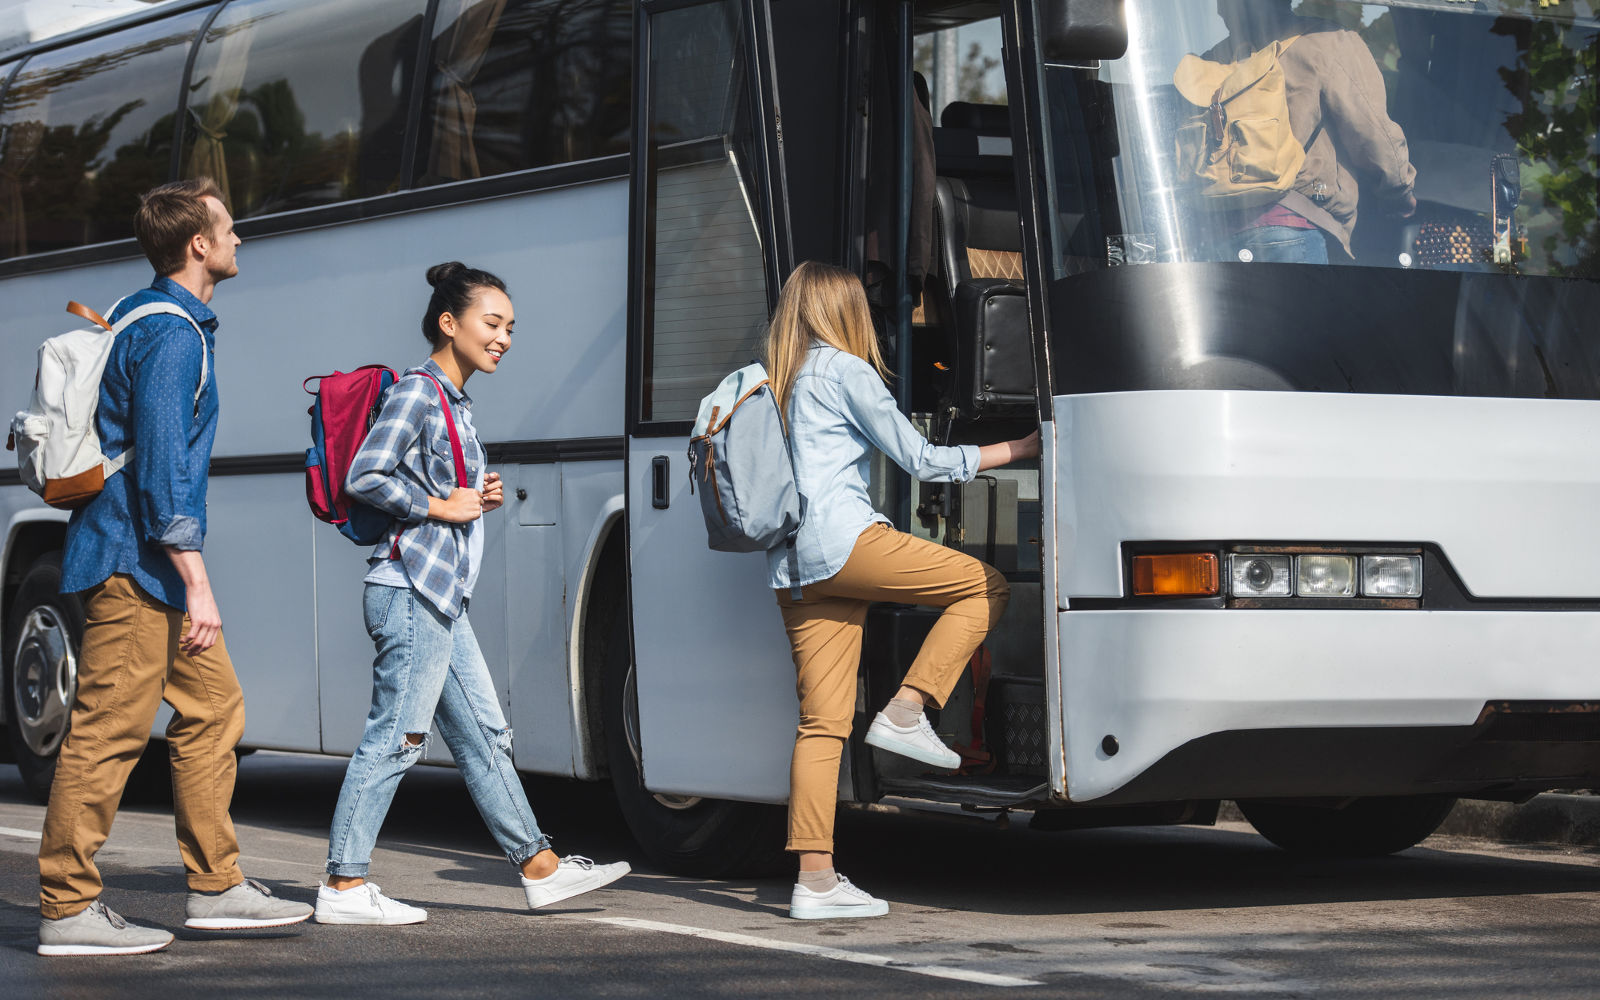 <p>Walk, bike, or take public transportation whenever possible. It saves you money on gas and parking fees and may even beat the traffic.</p><p>In fact, <a href="https://www.riderta.com/blogs/public-transportation-saves-money#:~:text=According%20to%20the%20American%20Public,purchase%20or%20lease%20the%20vehicle.">according</a> to the American Public Transportation Association’s (APTA) Transit Savings Report, people who use public transit instead of driving their vehicle can save an average of $13,000 annually, or $1,100 a month.</p>